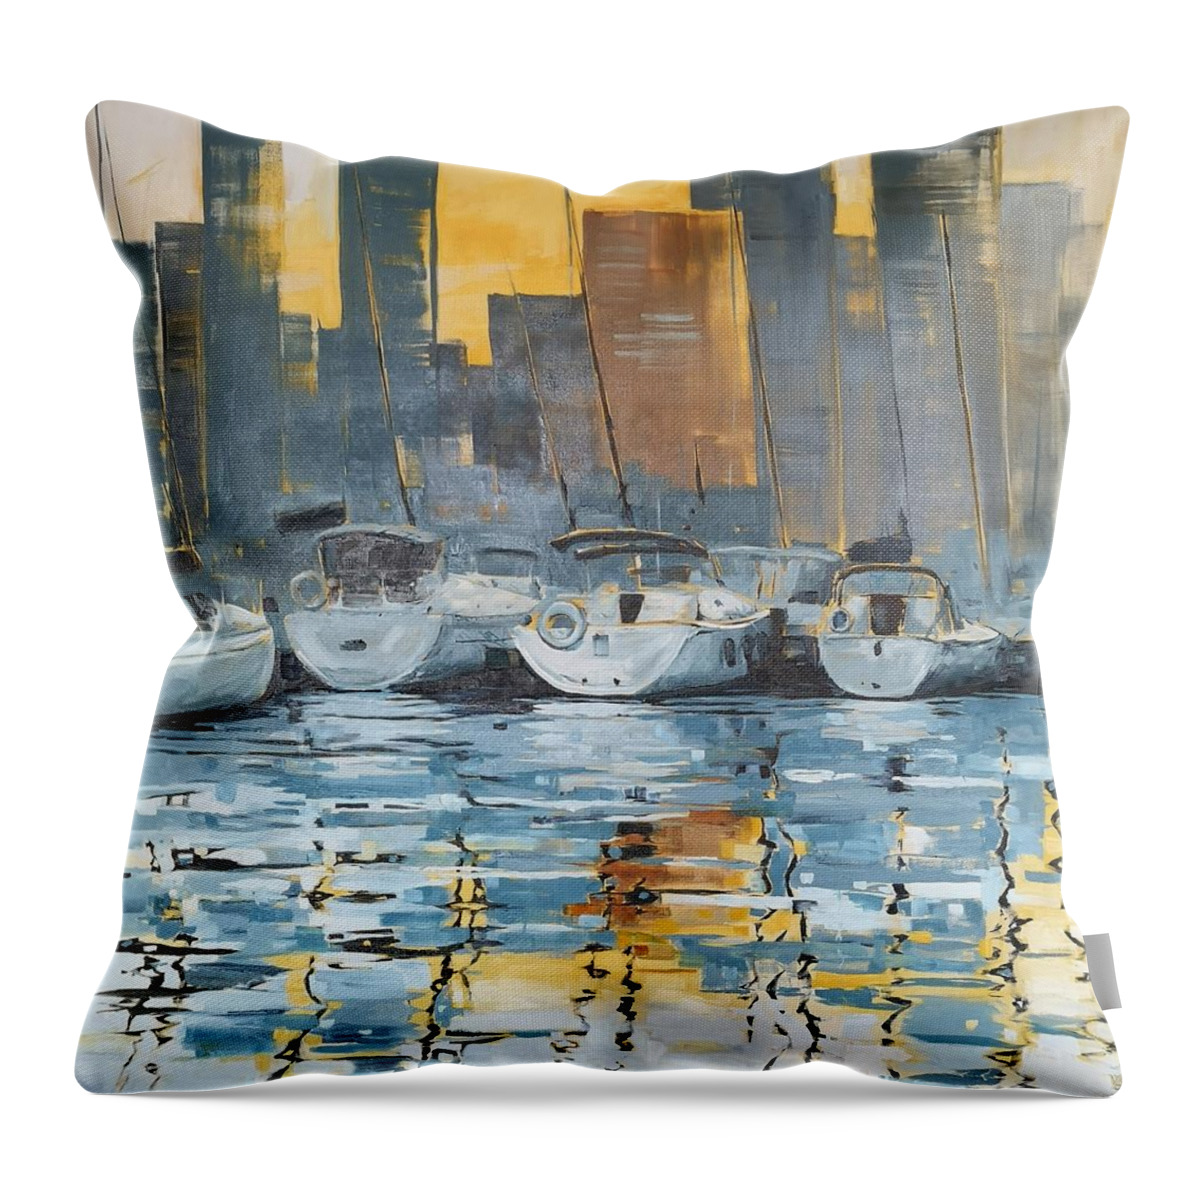 Harbour Throw Pillow featuring the painting Harbour by Sheila Romard